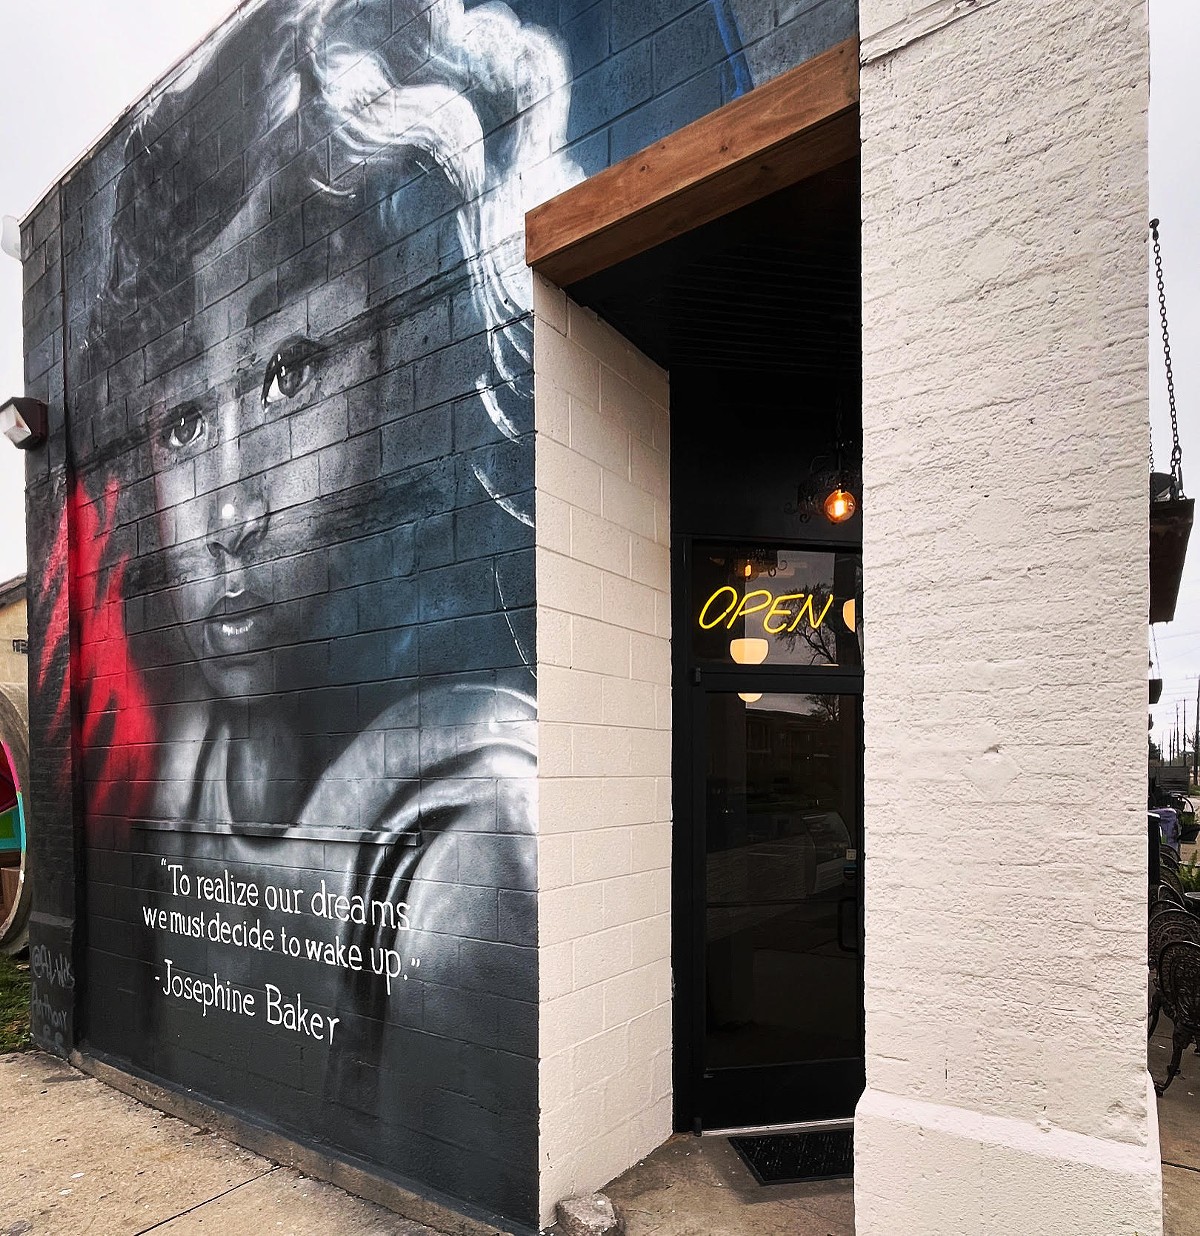 The outside of Cafe Noir features a mural of young Josephine Baker.